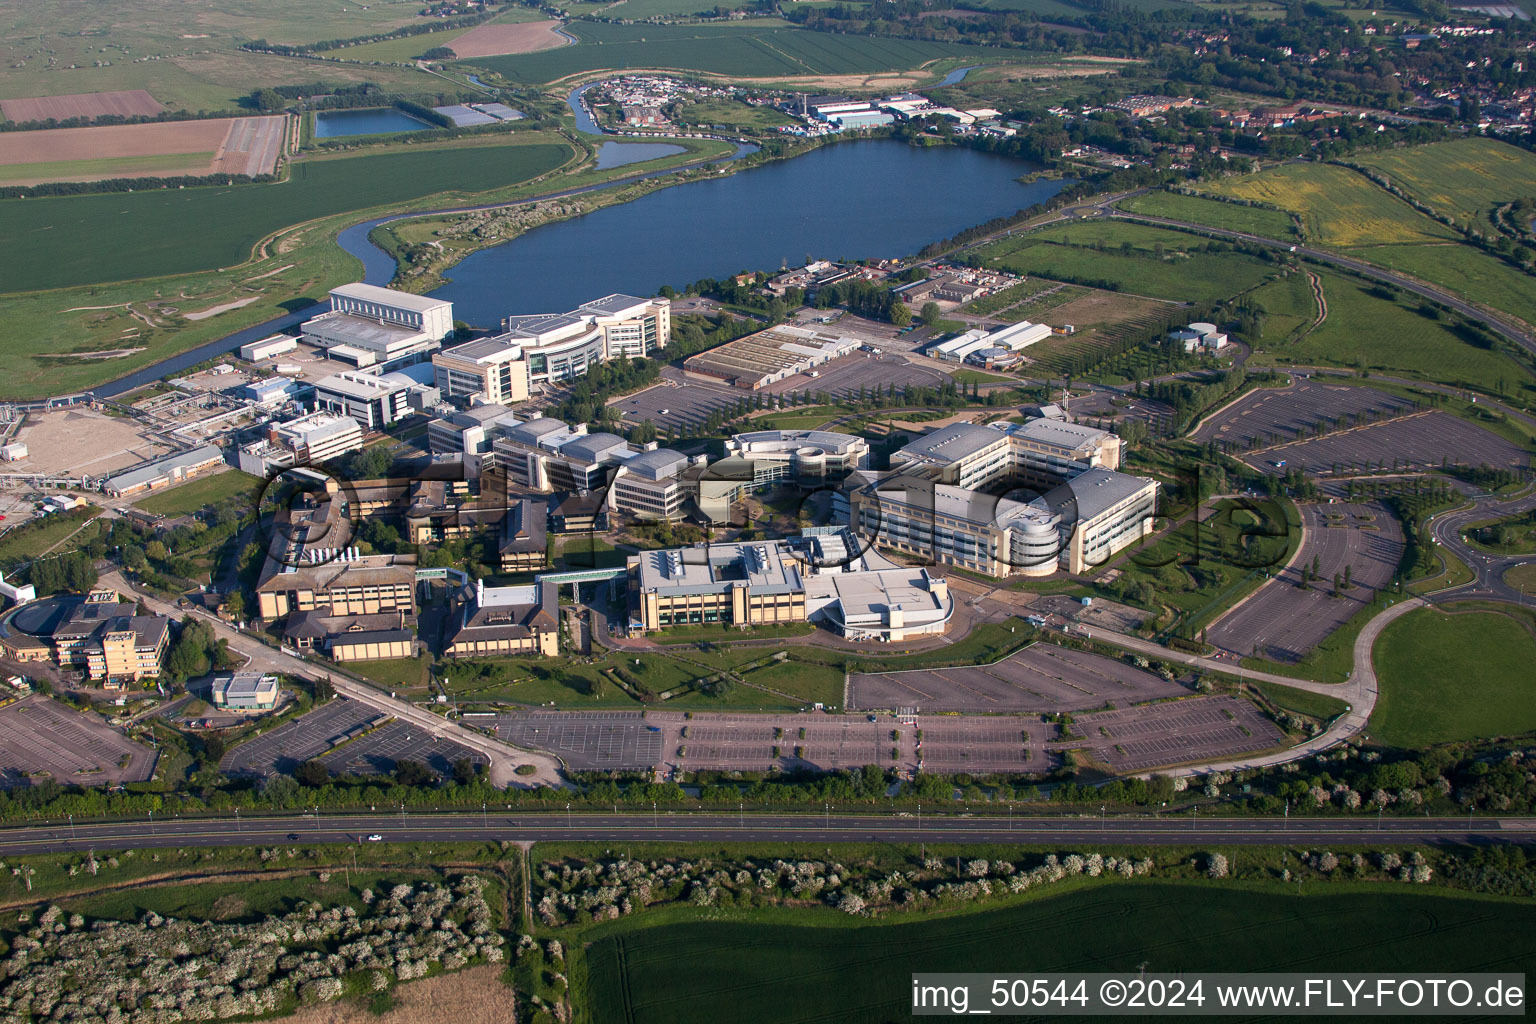 Bird's eye view of Building and production halls on the premises of the chemical manufacturers Pfizer Ltd and Discovery Park in Sandwich in England, United Kingdom